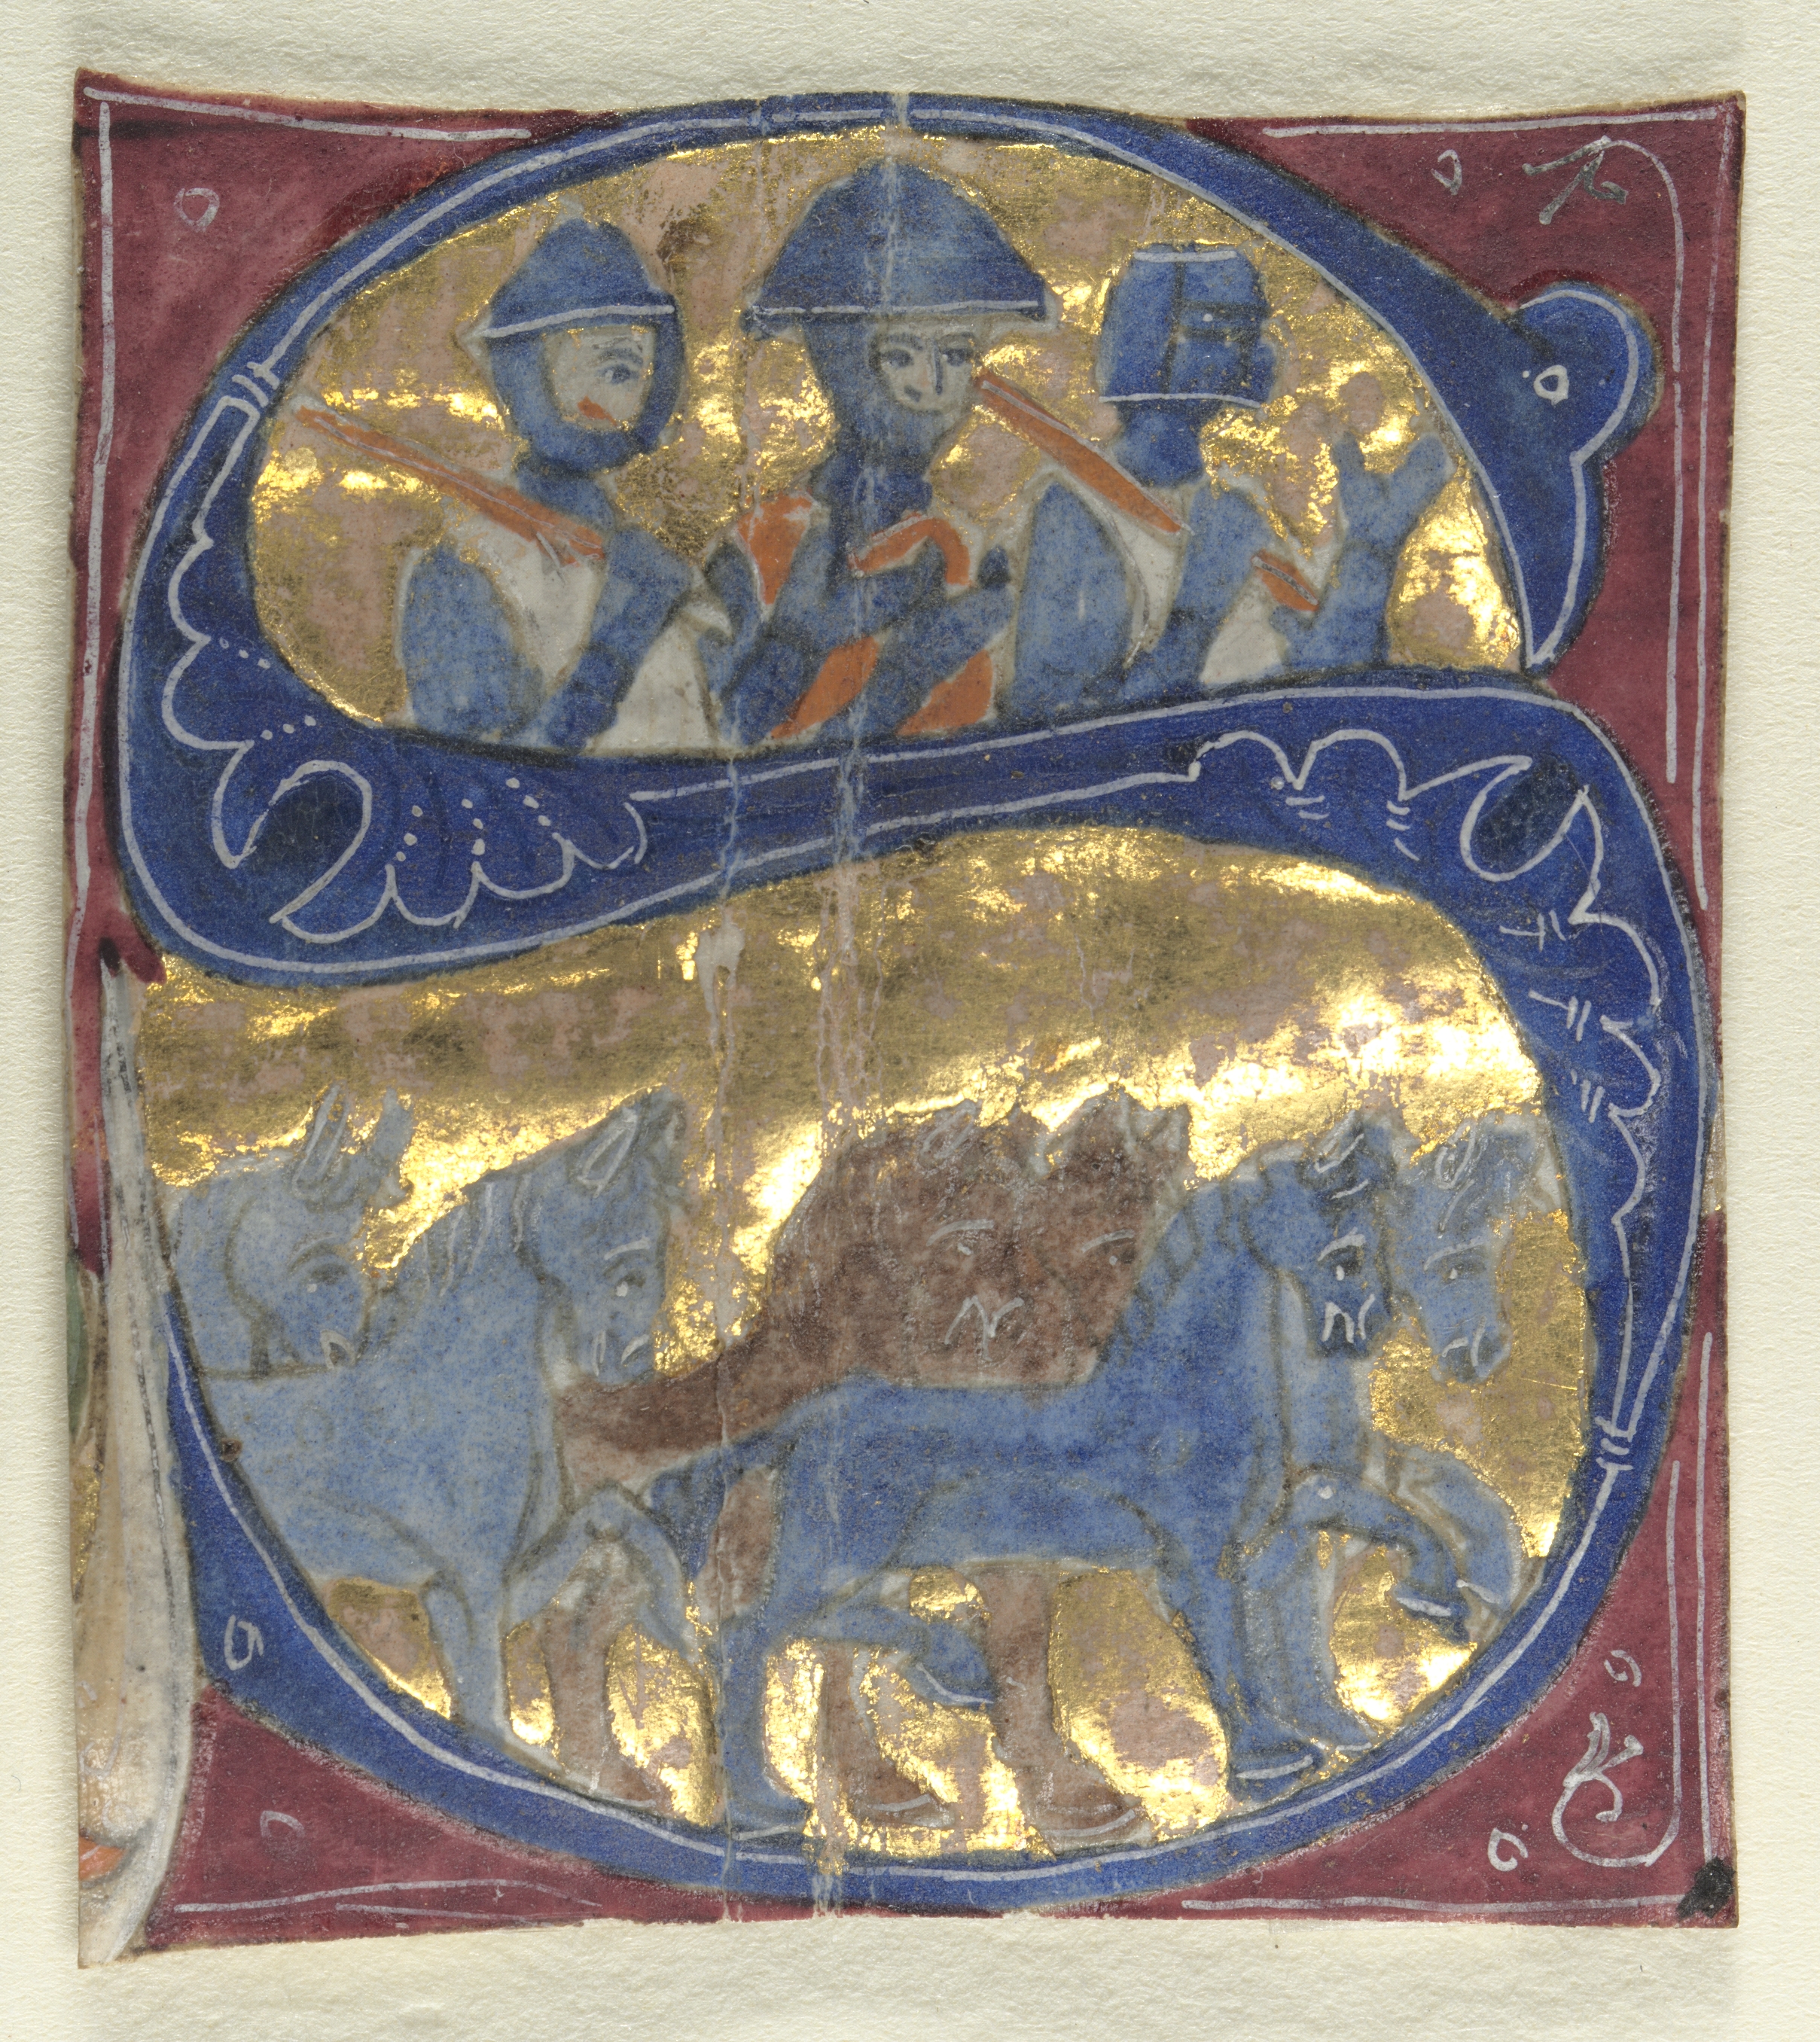 Historiated Initial (S) Excised from a Bible: Soldiers and Horses